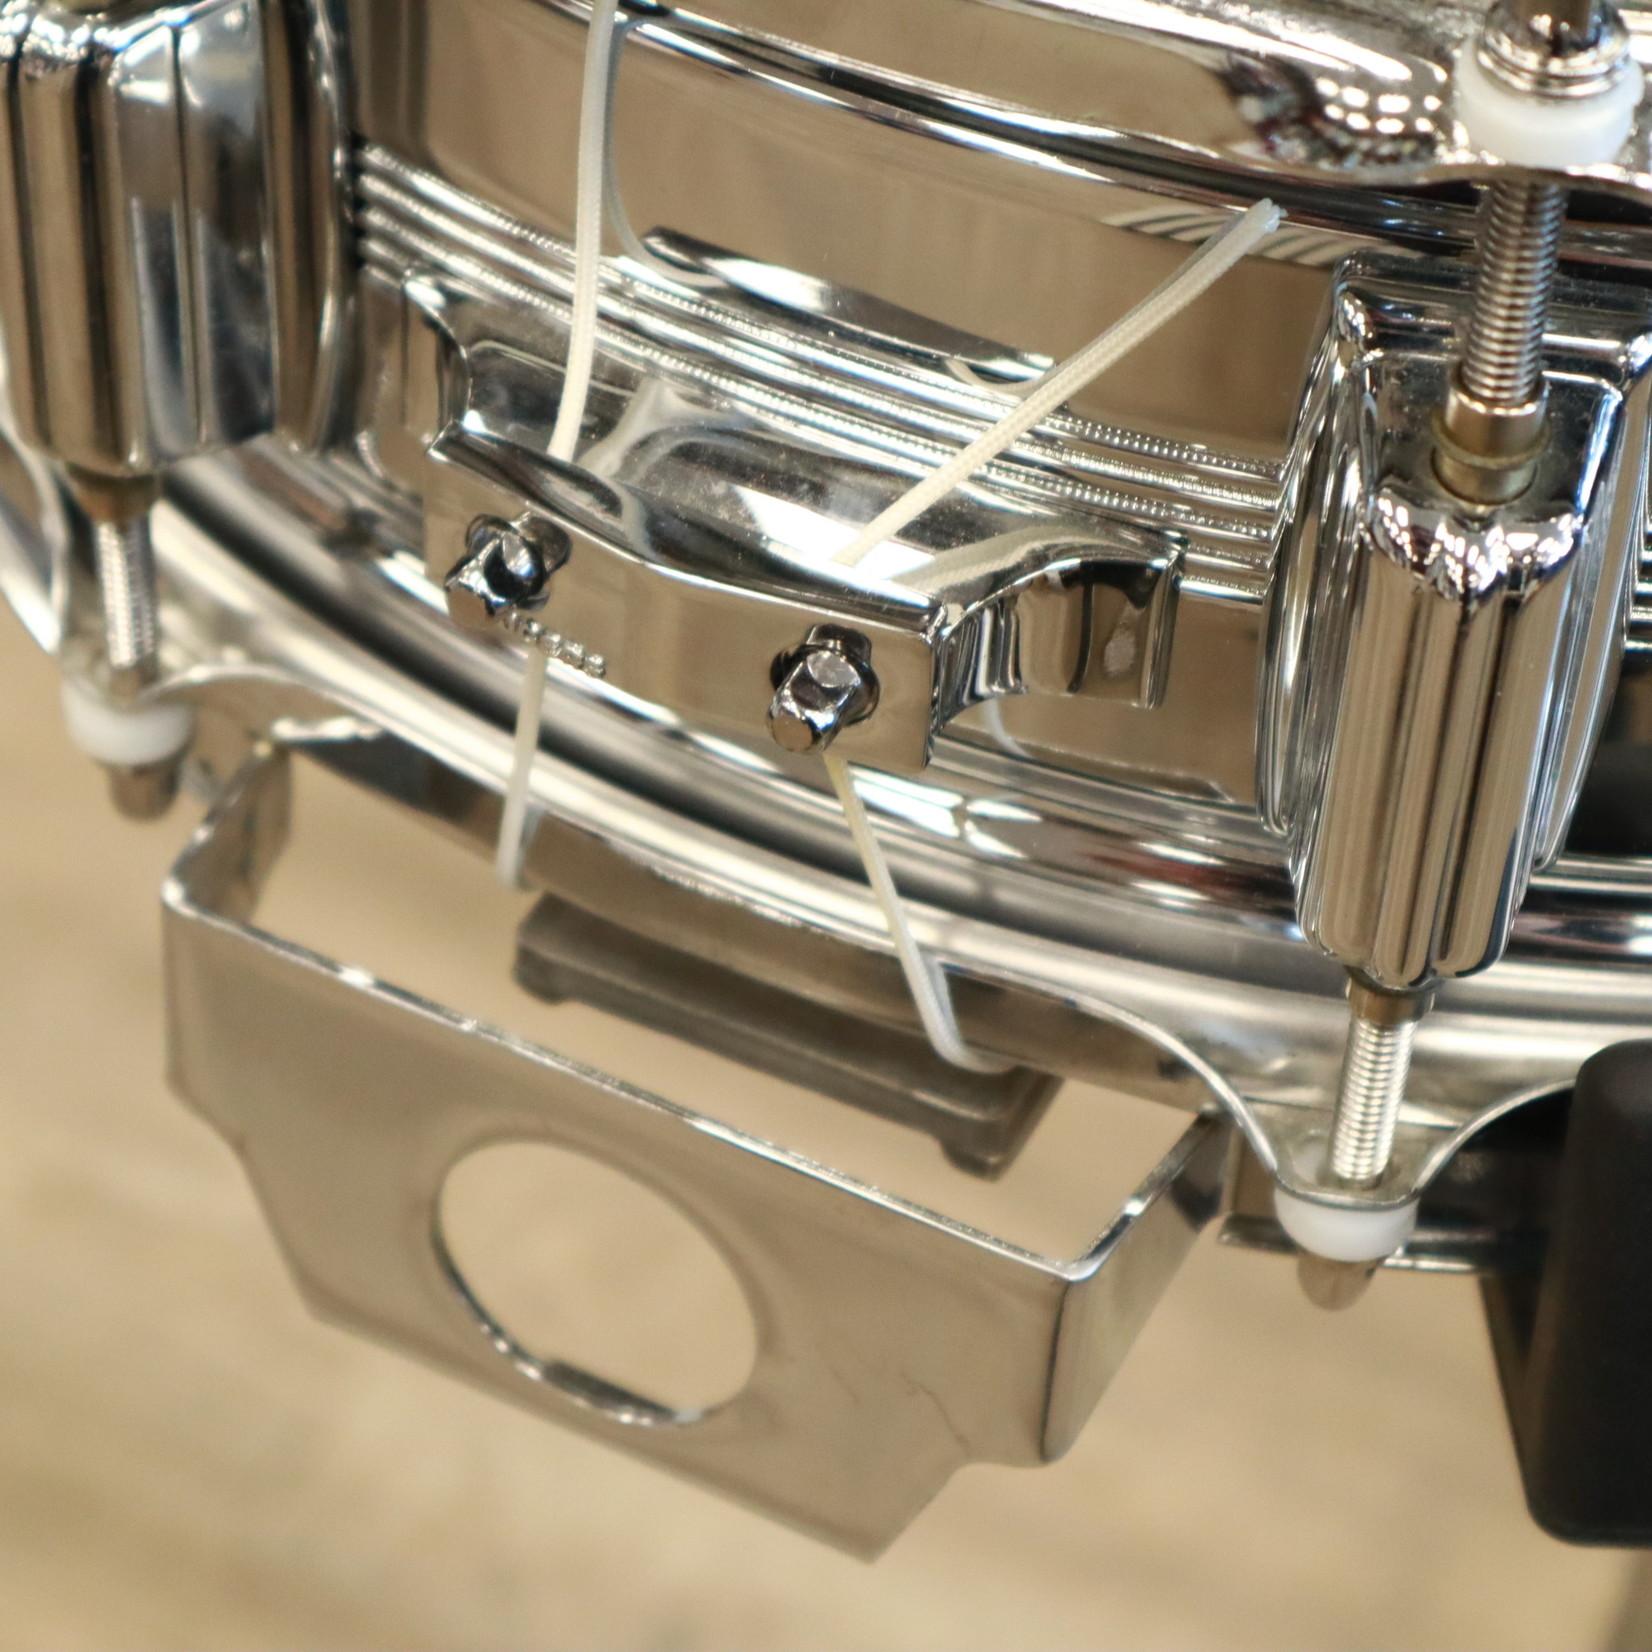 Rogers Used 1978 Rogers Dynasonic 5x14" Chrome over Brass Snare Drum